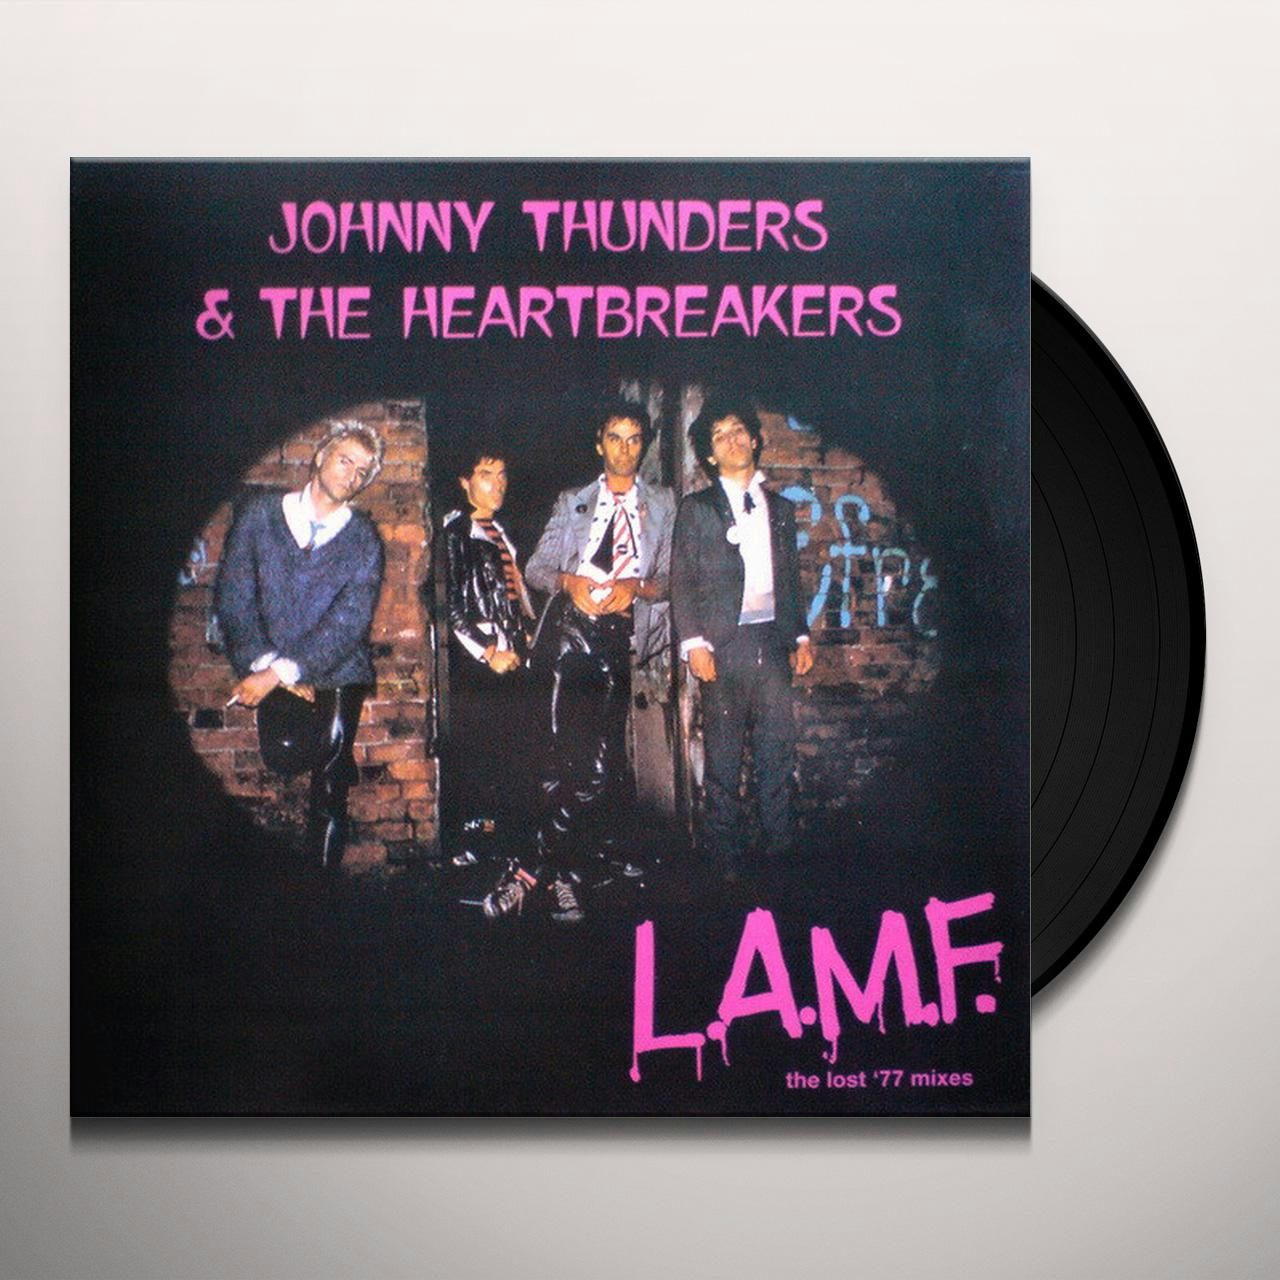 Johnny Thunders & The Heartbreakers L.A.M.F.: THE LOST '77 MIXES